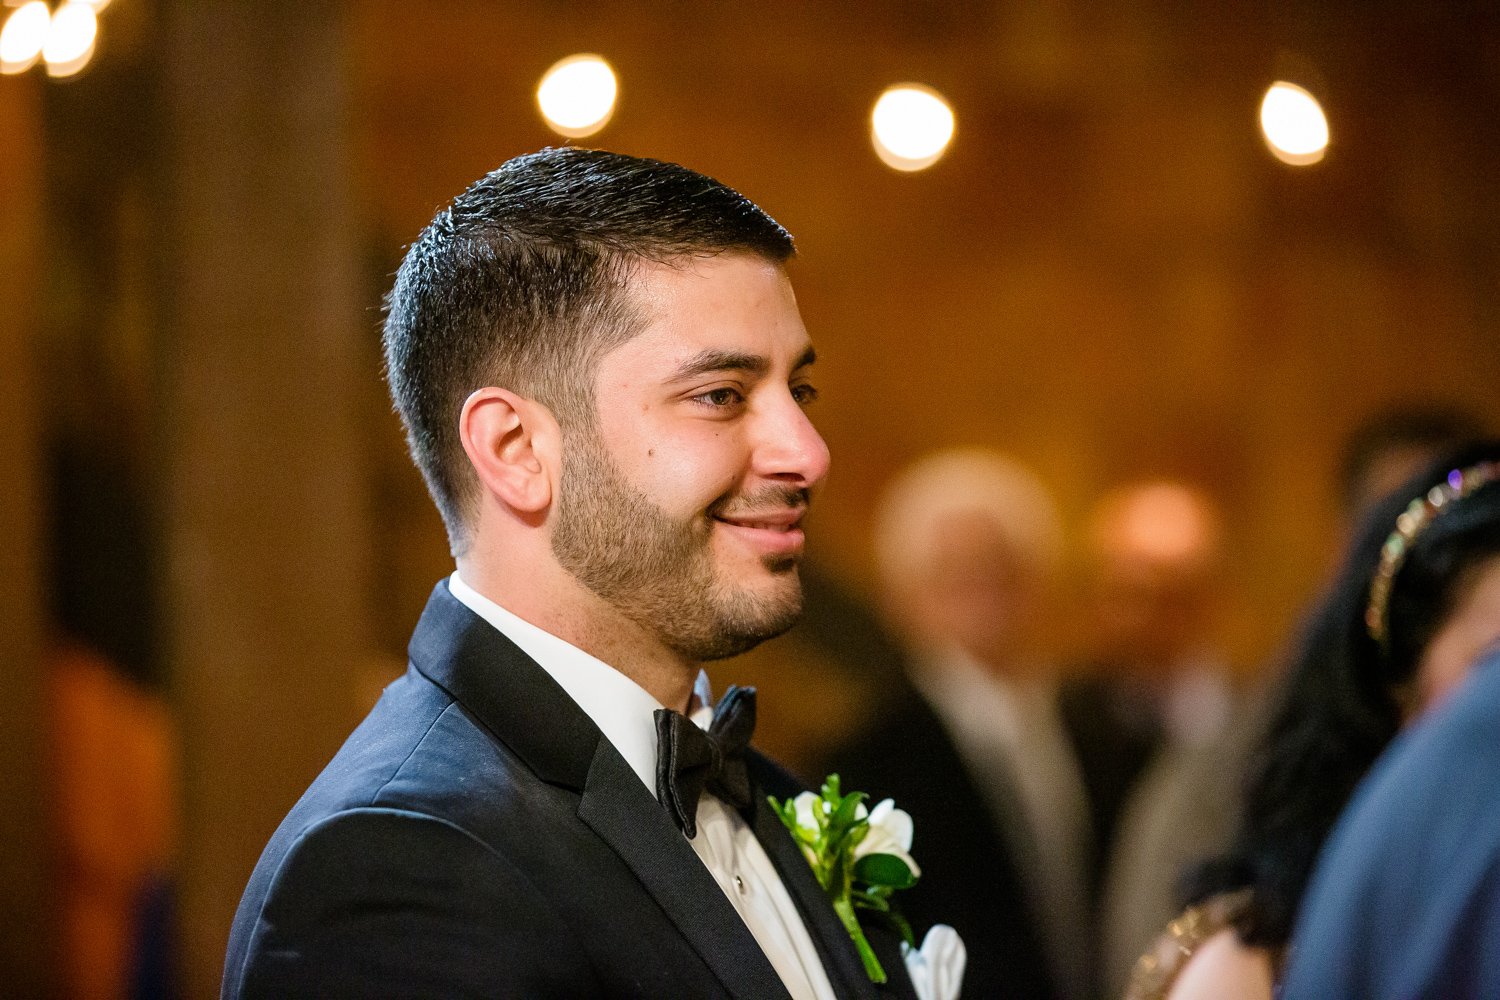 Grooms sees bride for first time at wedding ceremony